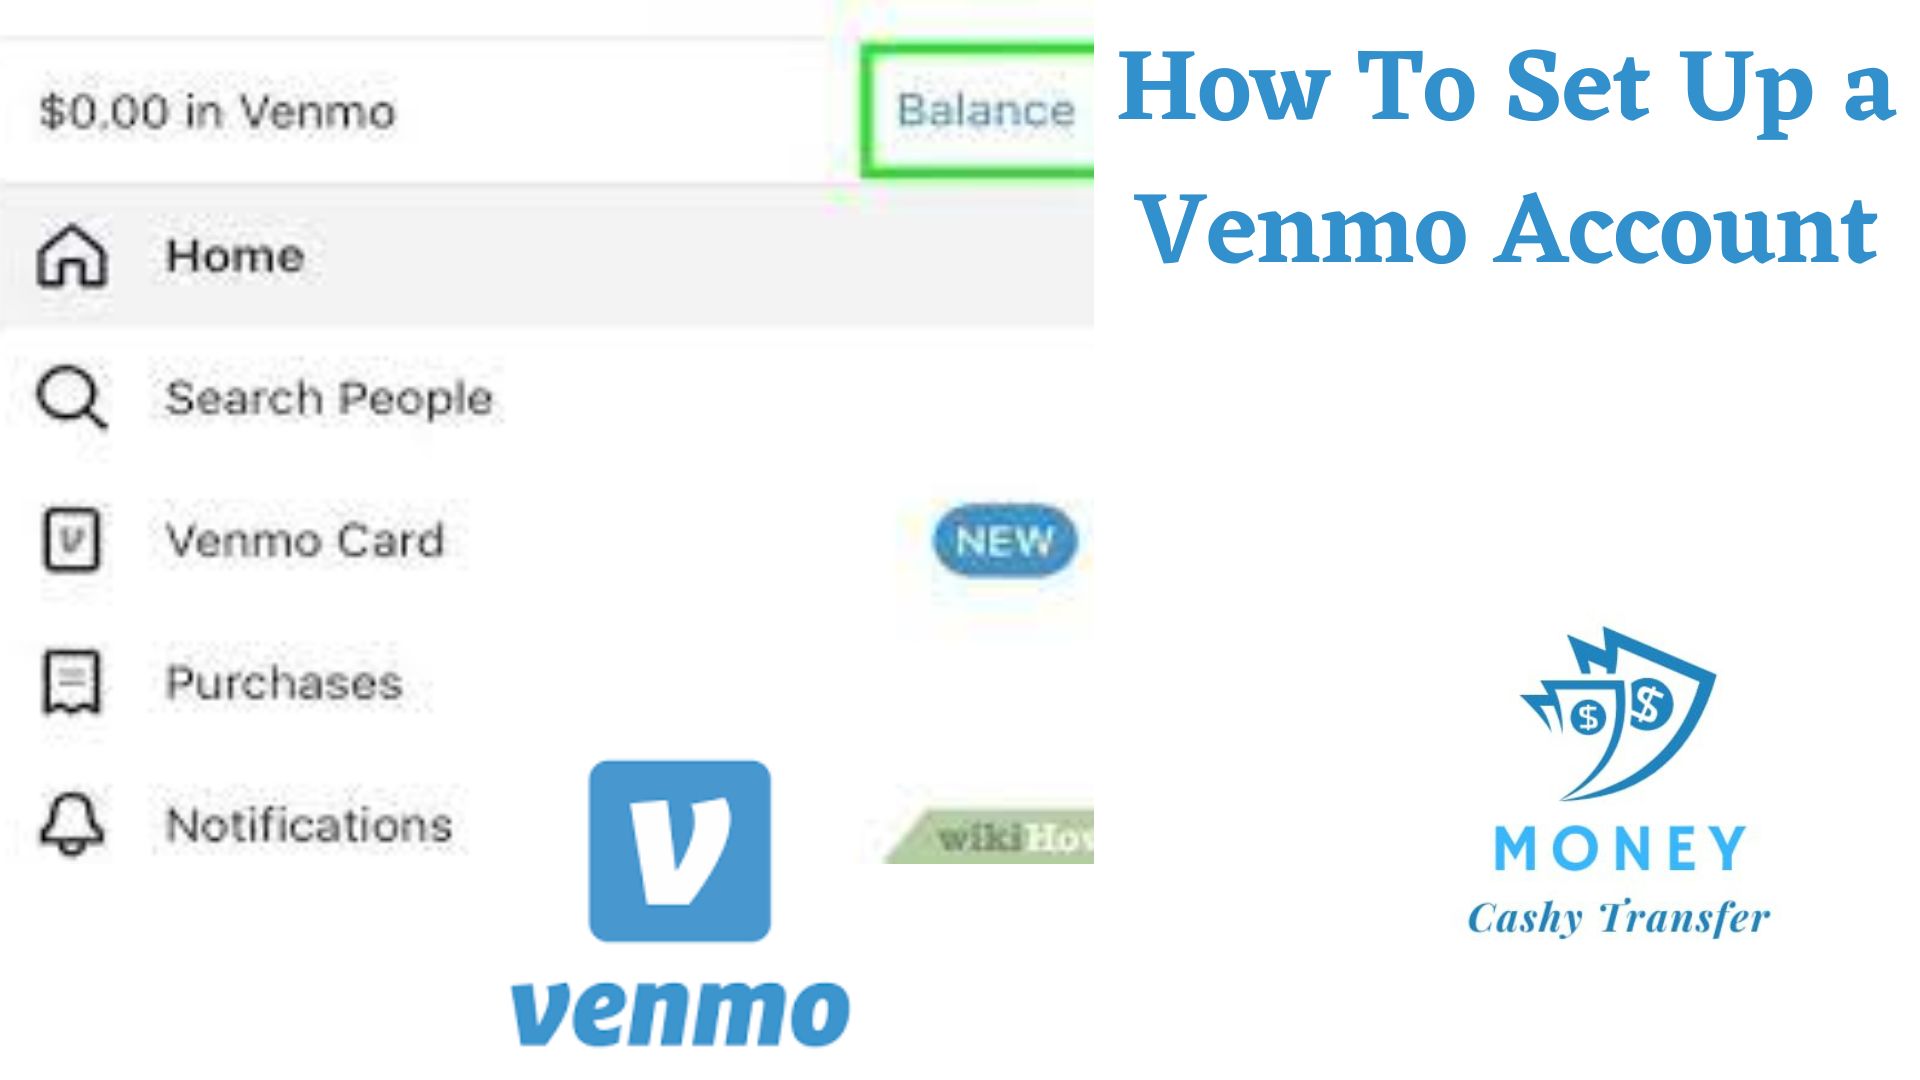 How To Set Up a Venmo Account